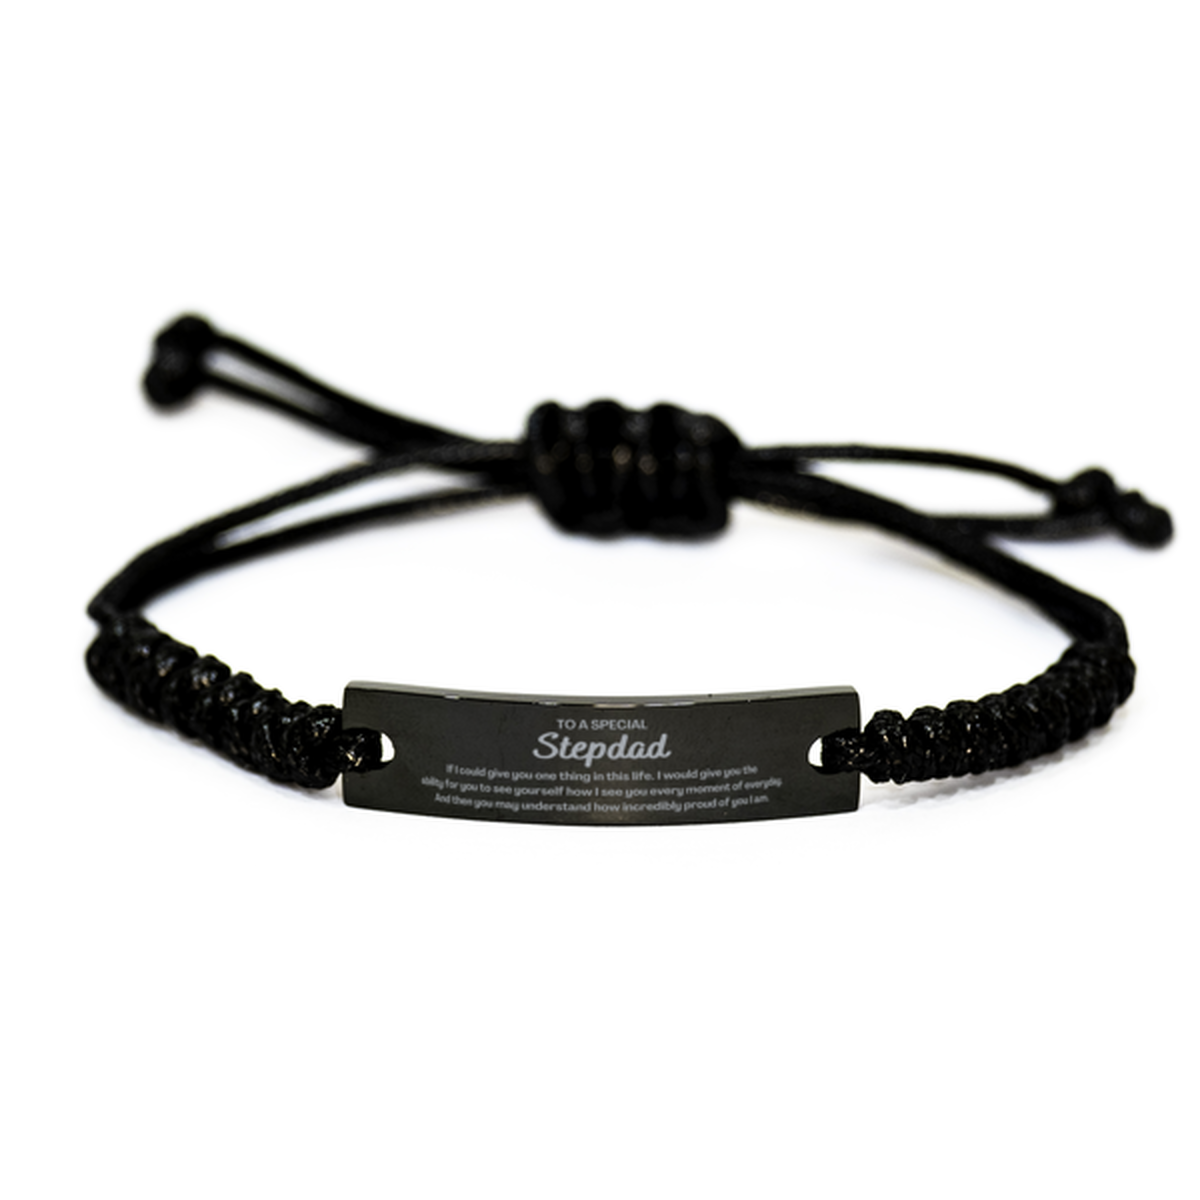 To My Stepdad Black Rope Bracelet, Gifts For Stepdad Engraved, Inspirational Gifts for Christmas Birthday, Epic Gifts for Stepdad To A Special Stepdad how incredibly proud of you I am